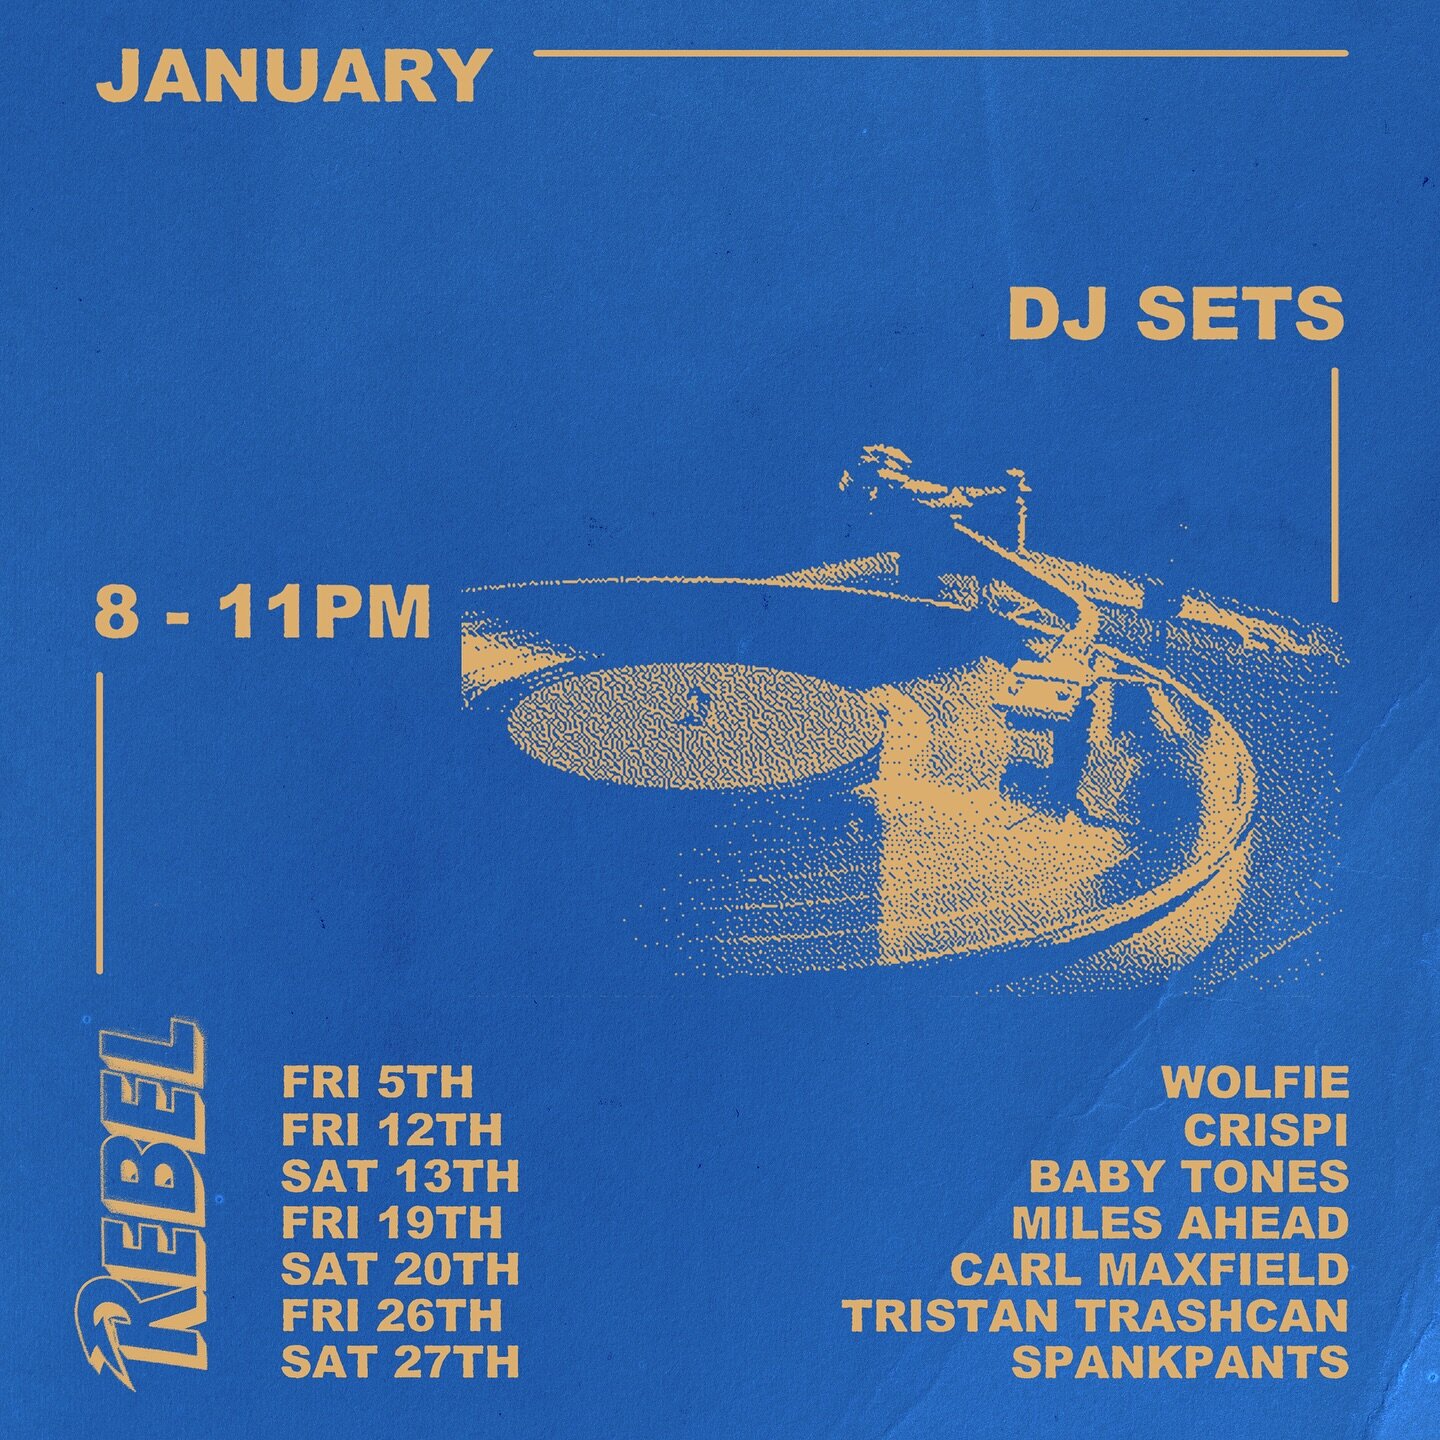 happy new year 🎉 another round of disk jockeys for January 🪩 spinning records 8-11pm Fridays and Saturdays 🔥 #preston3072 #divebar #vinyl #melbourne